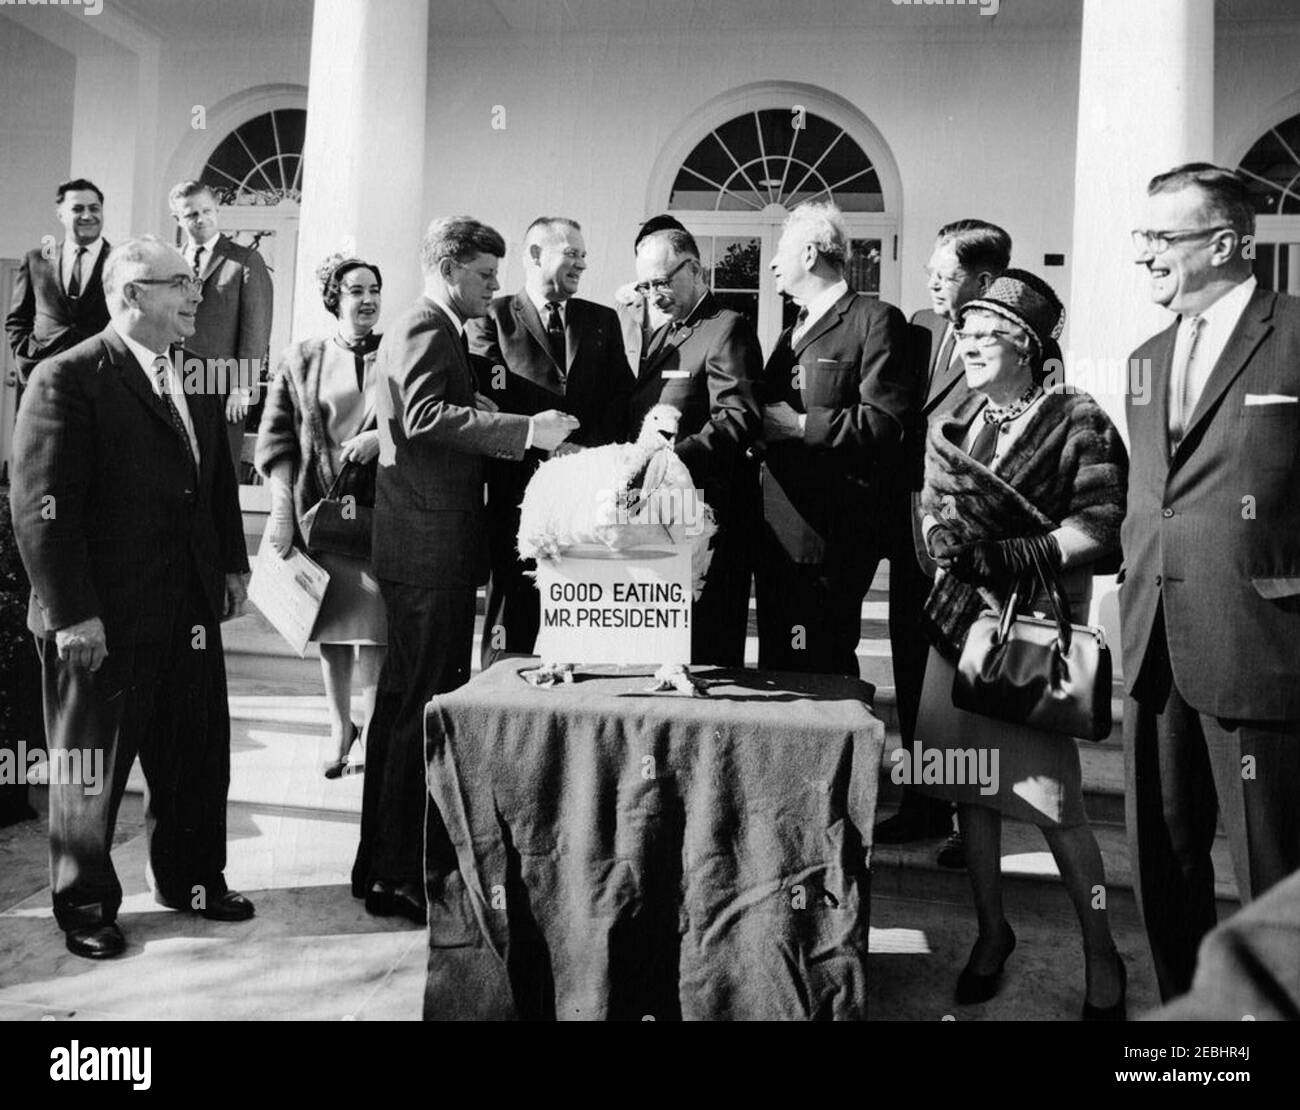 Presentation of a Thanksgiving Turkey to President Kennedy, 10:00AM. President John F. Kennedy Kennedy receives a turkey presented to him for Thanksgiving by the National Turkey Federation and the Poultry and Egg National Board; President Kennedy pardoned the turkey. Left to right: Administrative Assistant to the President, Mike Manatos; Vice President of the National Turkey Federation, Morris G. Smith; two unidentified persons; President Kennedy; President of the National Turkey Federation, Robert M. McPherrin; unidentified; Senator Everett Dirksen (Illinois); Executive Secretary-Treasurer of Stock Photo